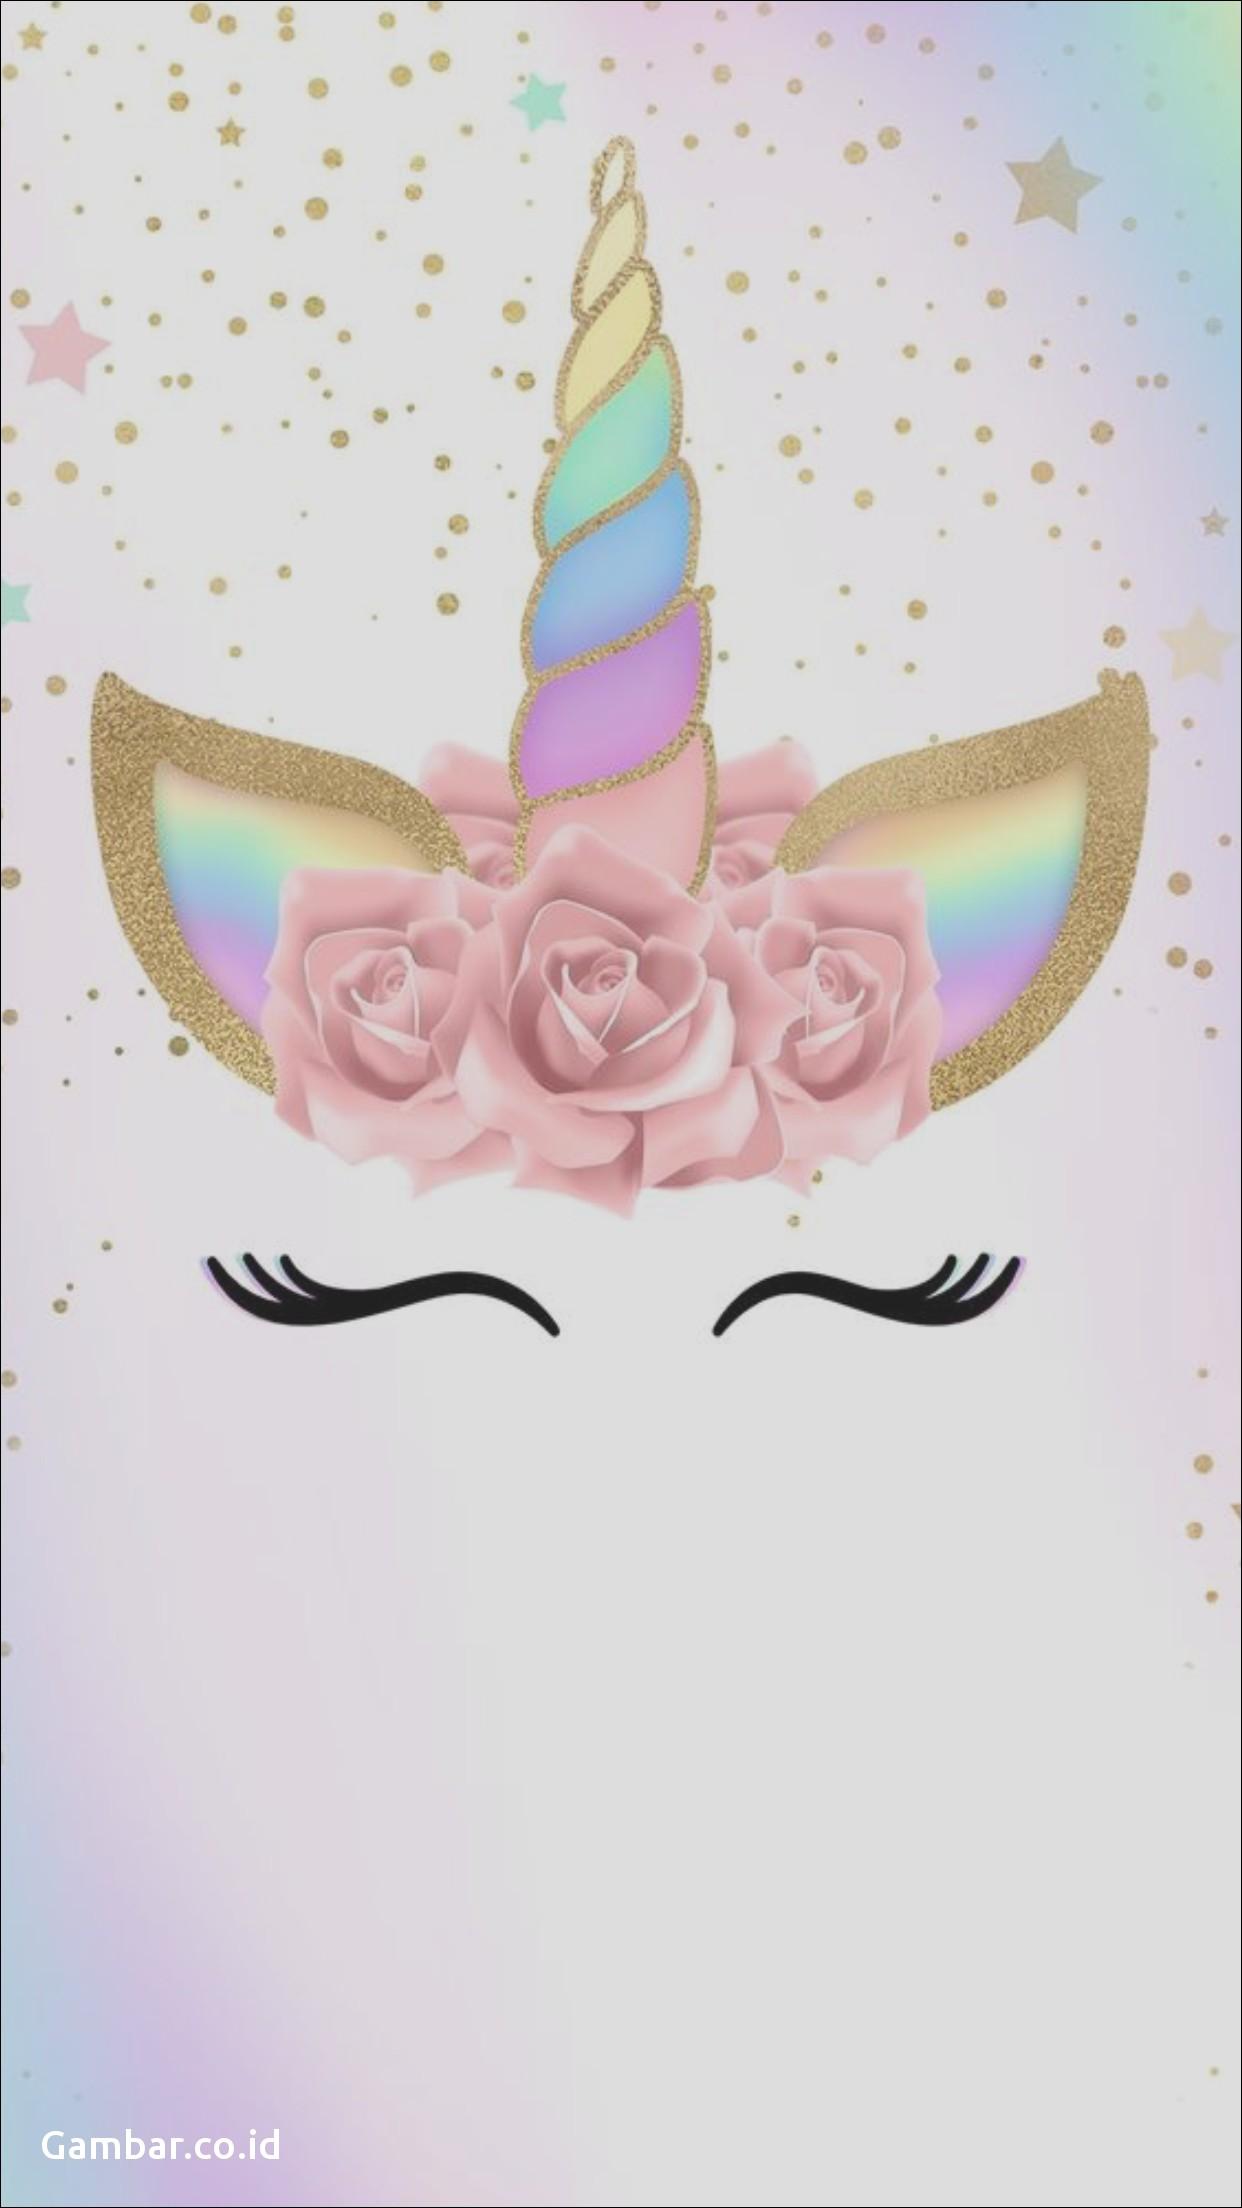 Cute Unicorn backgrounds - APK Download for Android | Aptoide